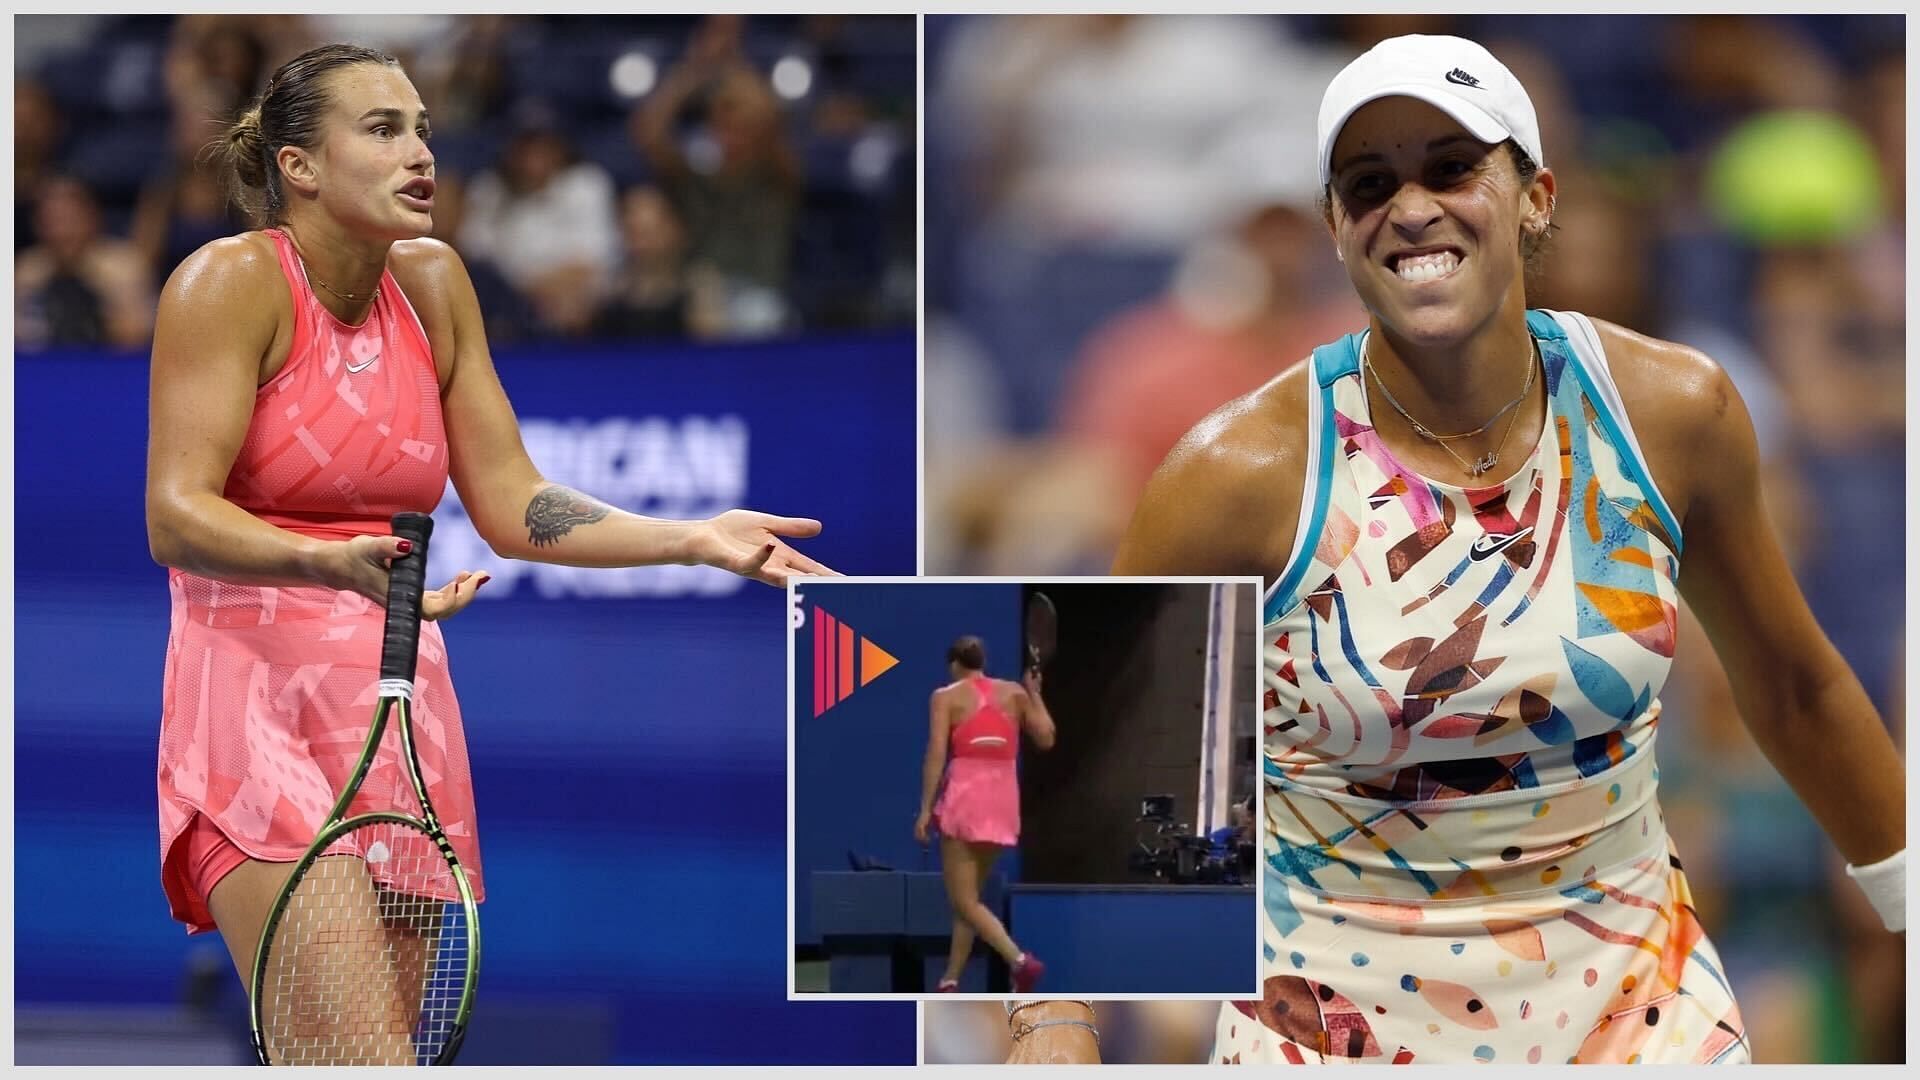 Aryna Sabalenka loses her cool during US Open SF against Madison Keys